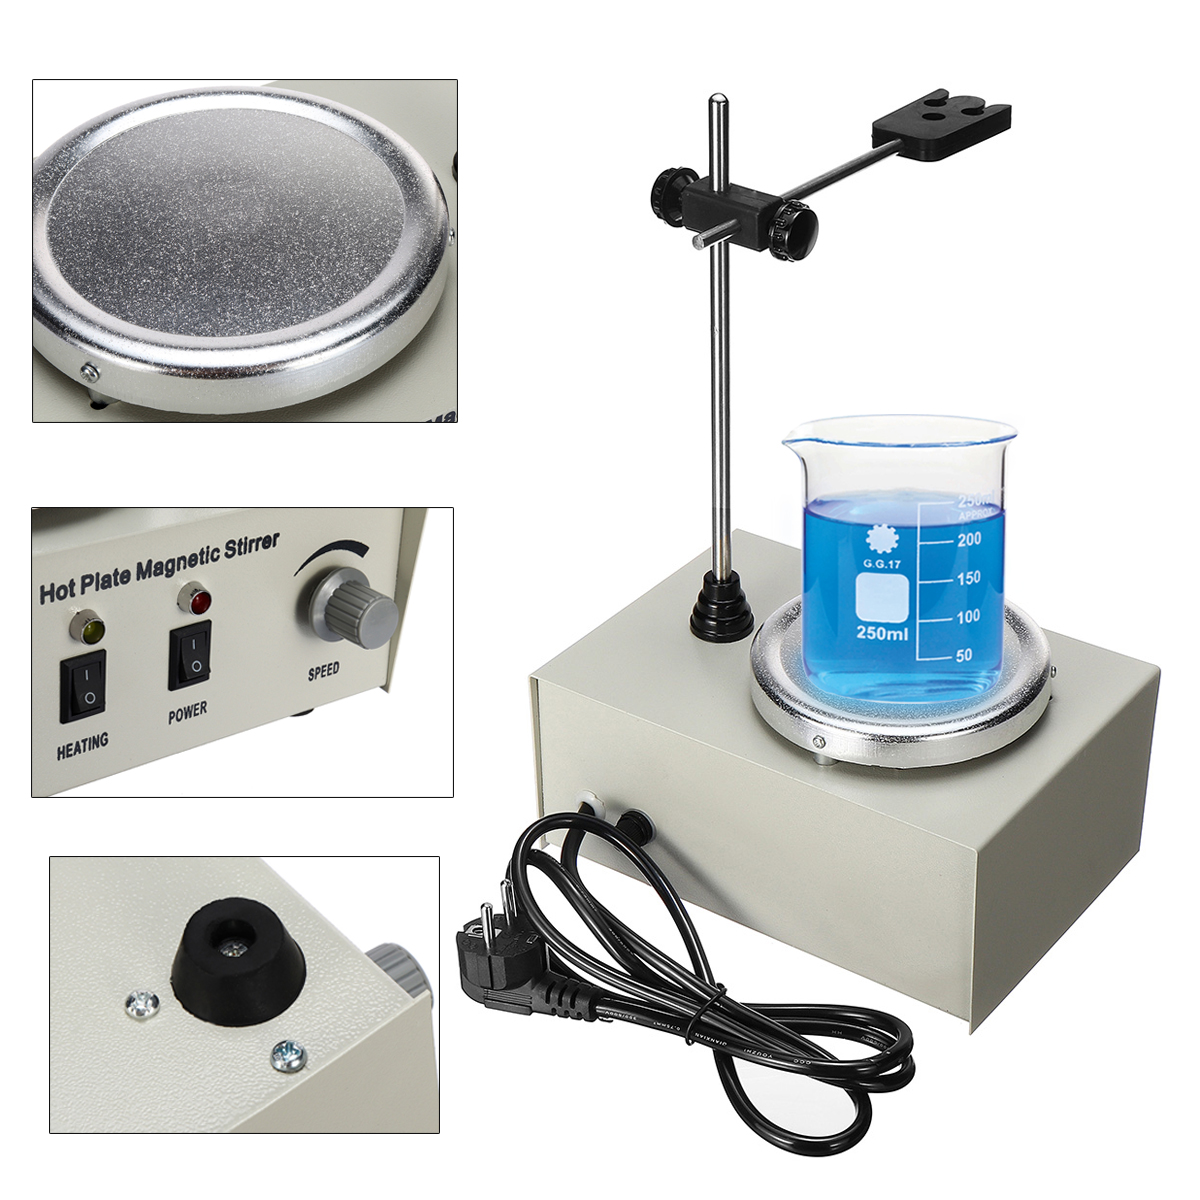 79-1-1000ML-Hot-Plate-Magnetic-Stirrer-Lab-Heating-Mixer-Temperature-Speed-Adjustable-1298966-3